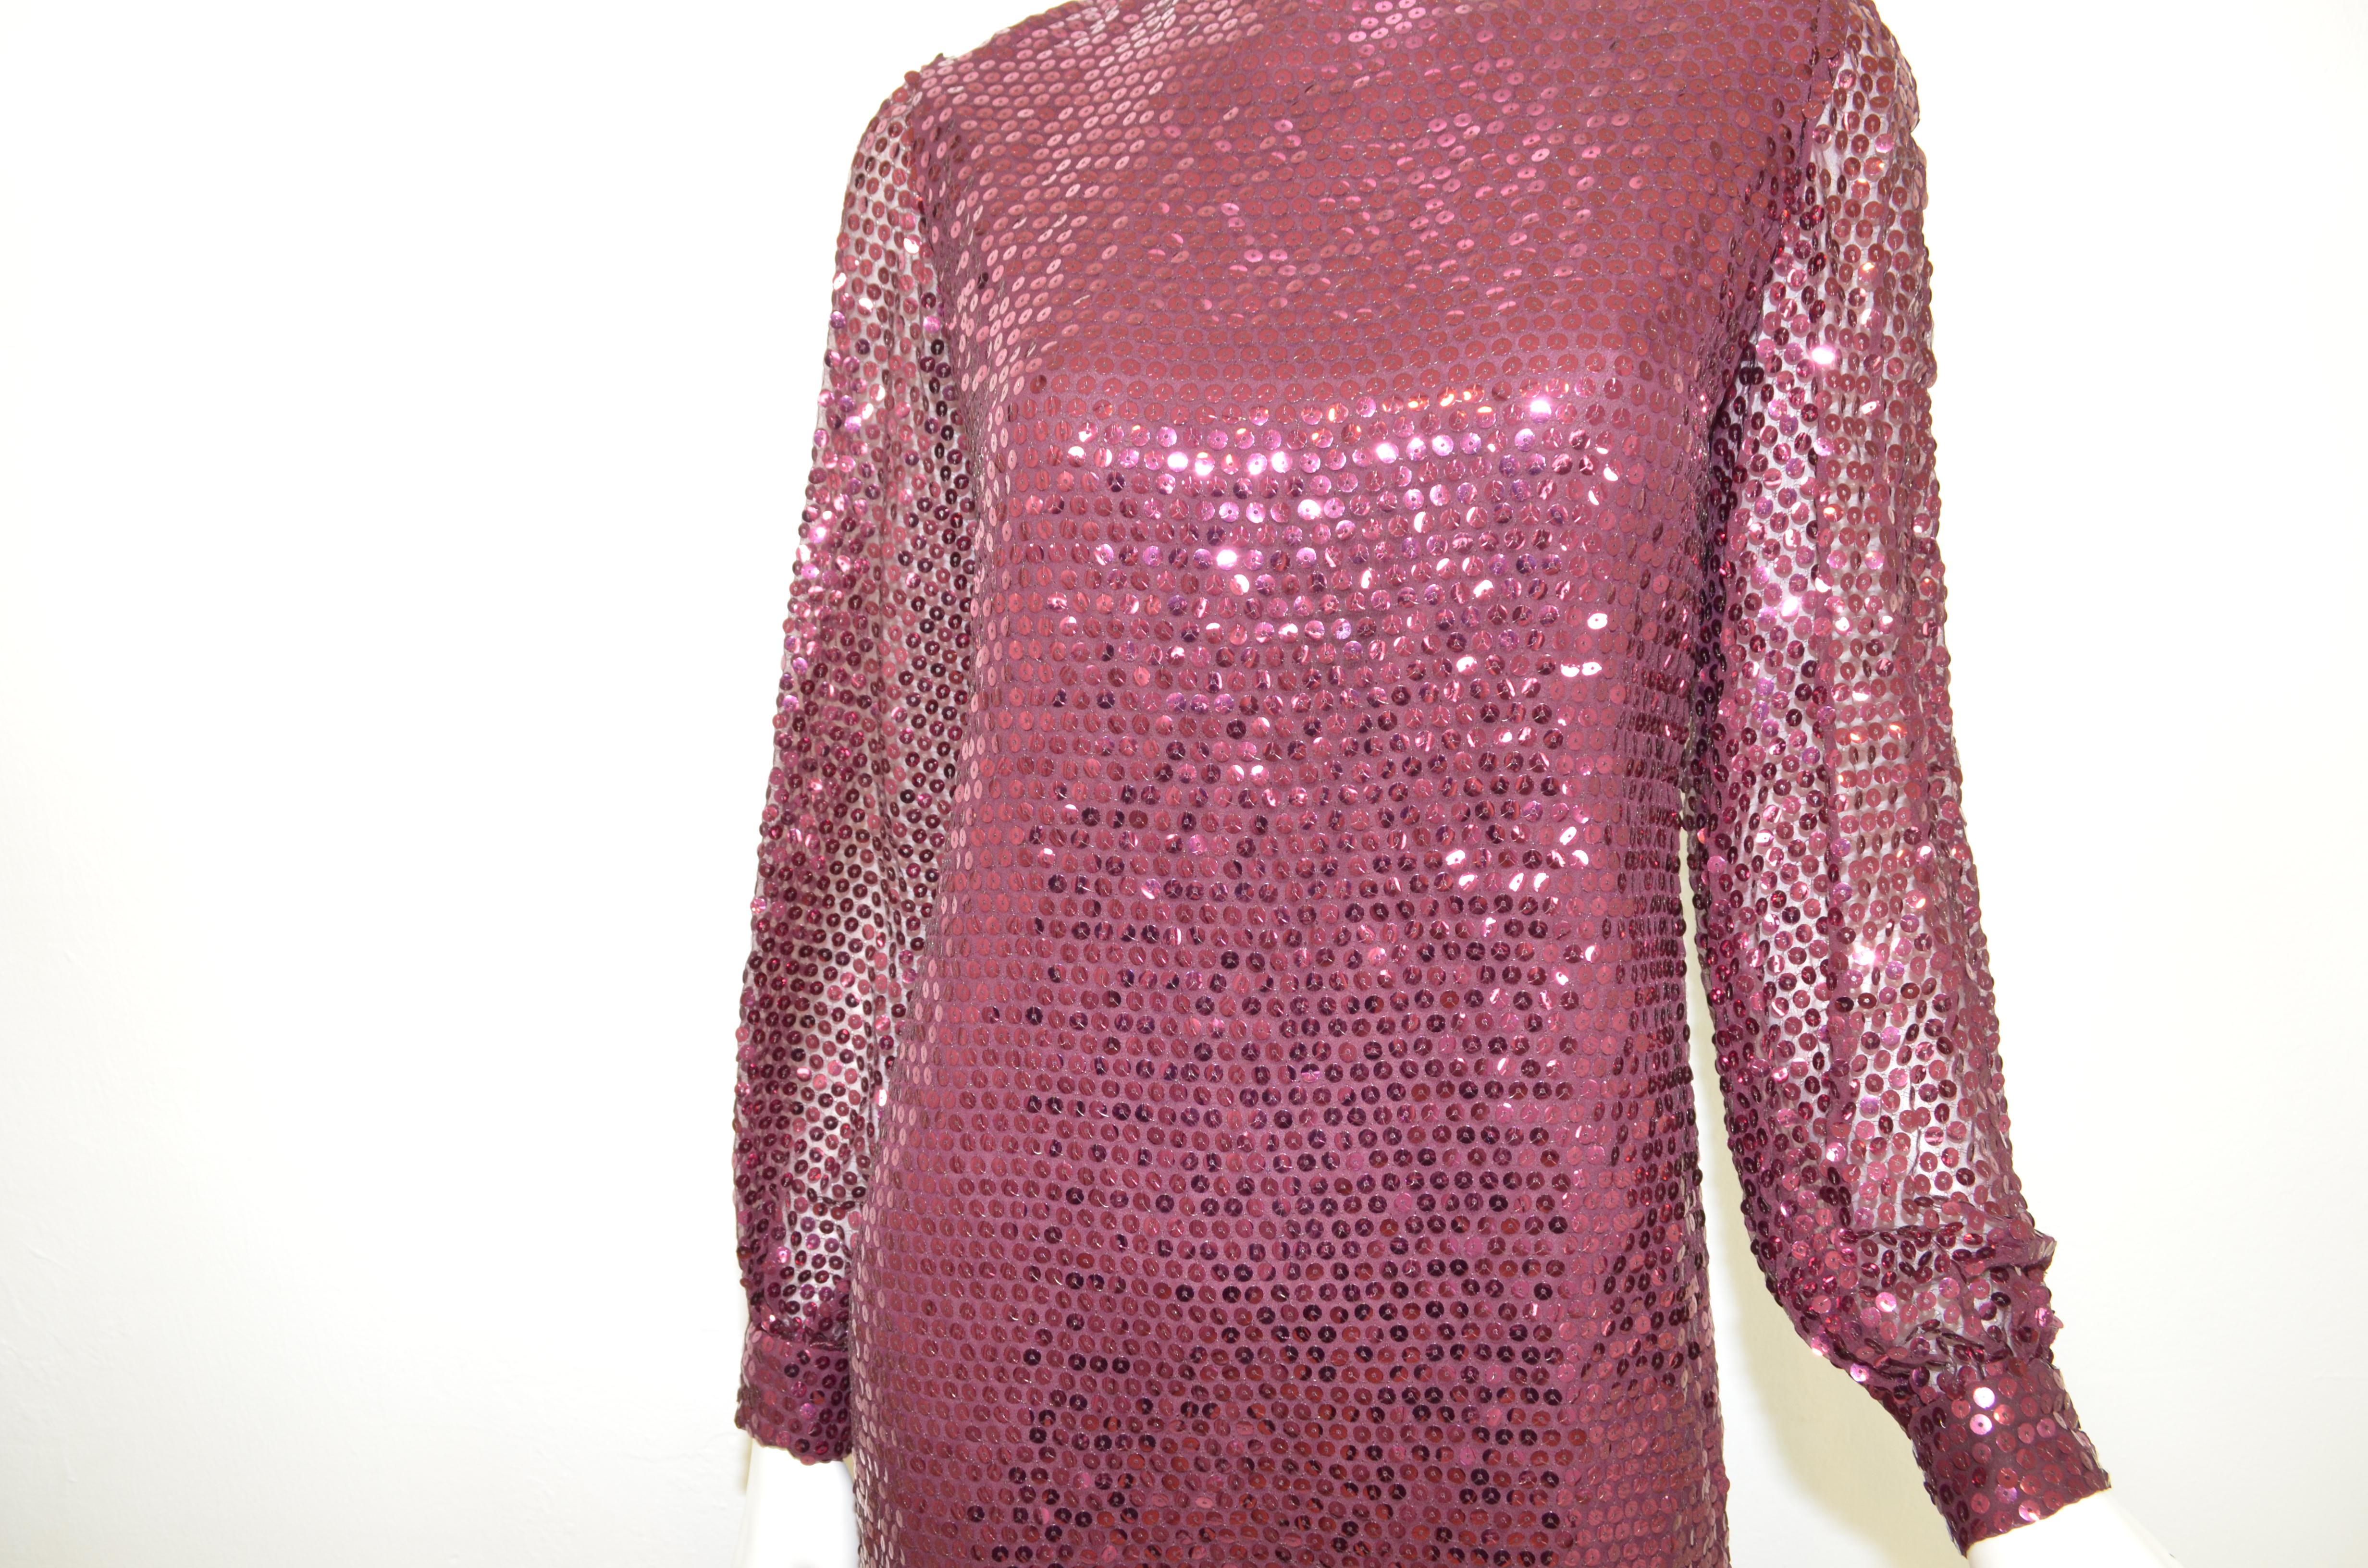 Oscar de la Renta 1970's Sequin Embellished Dress -- Featured in a maroon color embellished with sequins. Dress has a back zipper fastening and a full lining. Dress is in great vintage condition with no major flaws to mention. 

Measurements:
bust